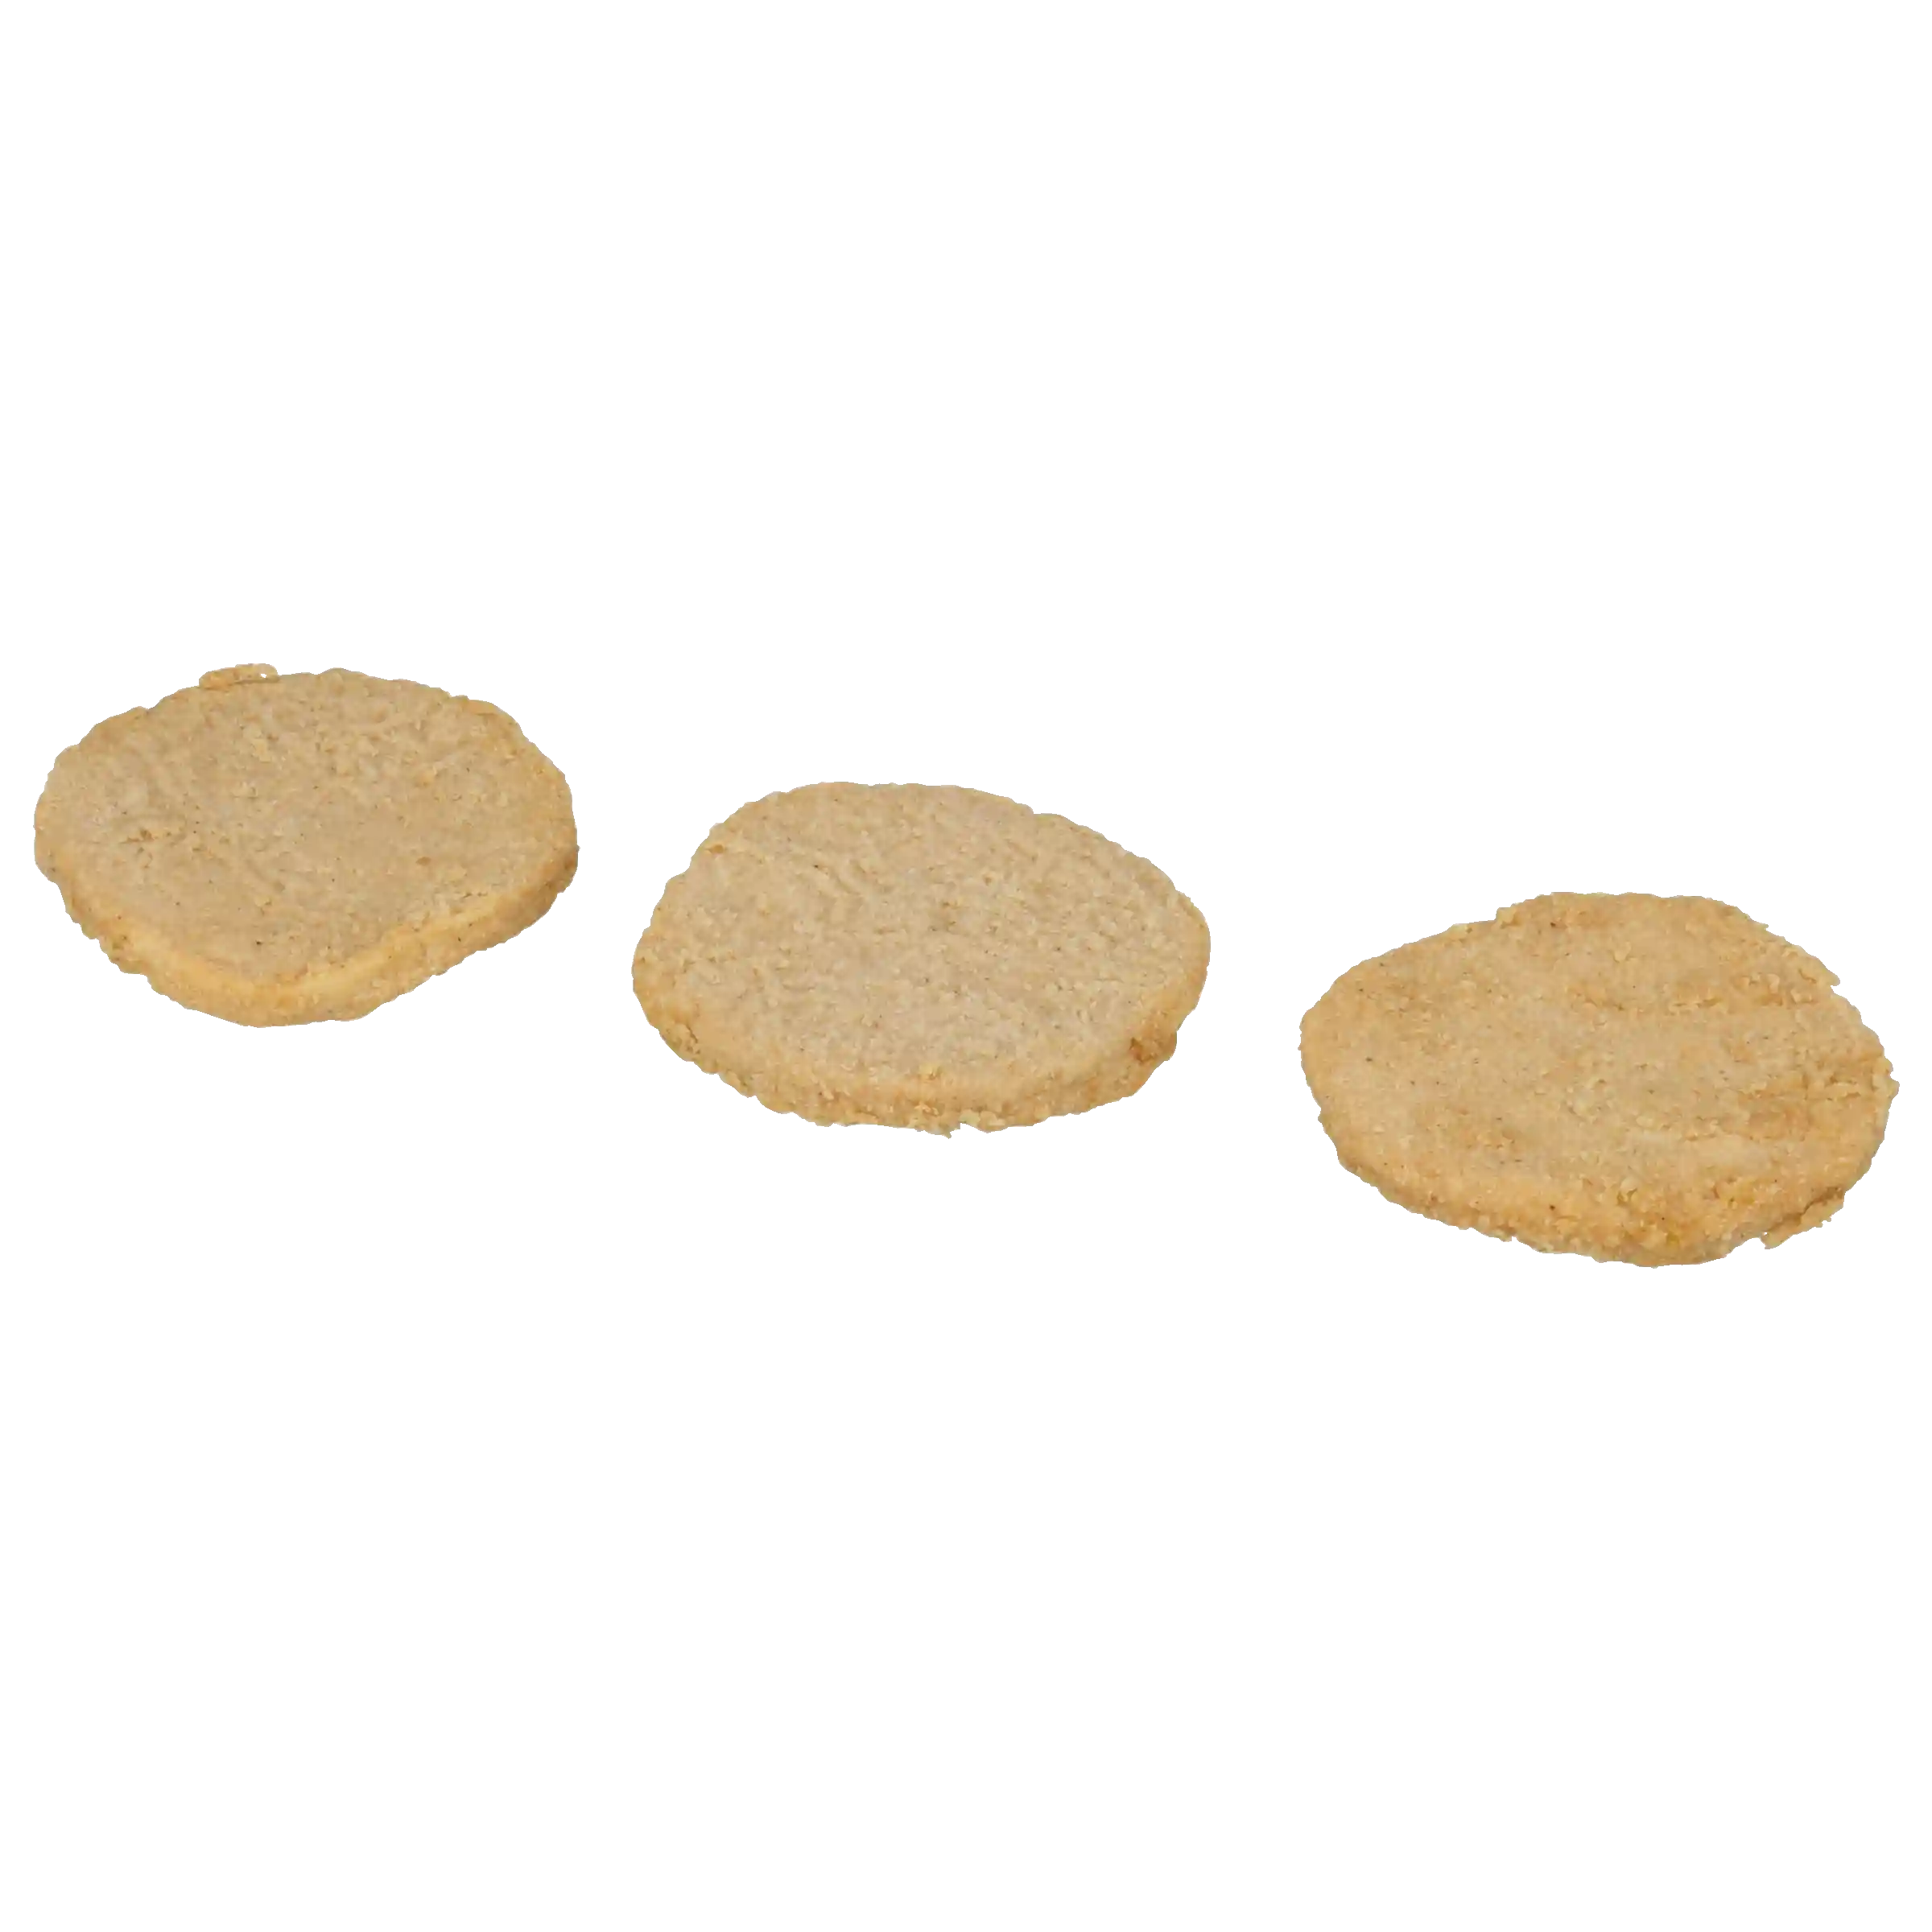 Tyson® Fully Cooked Whole Grain Breaded Chicken Breast Patties, CN, 3.19 oz. _image_11